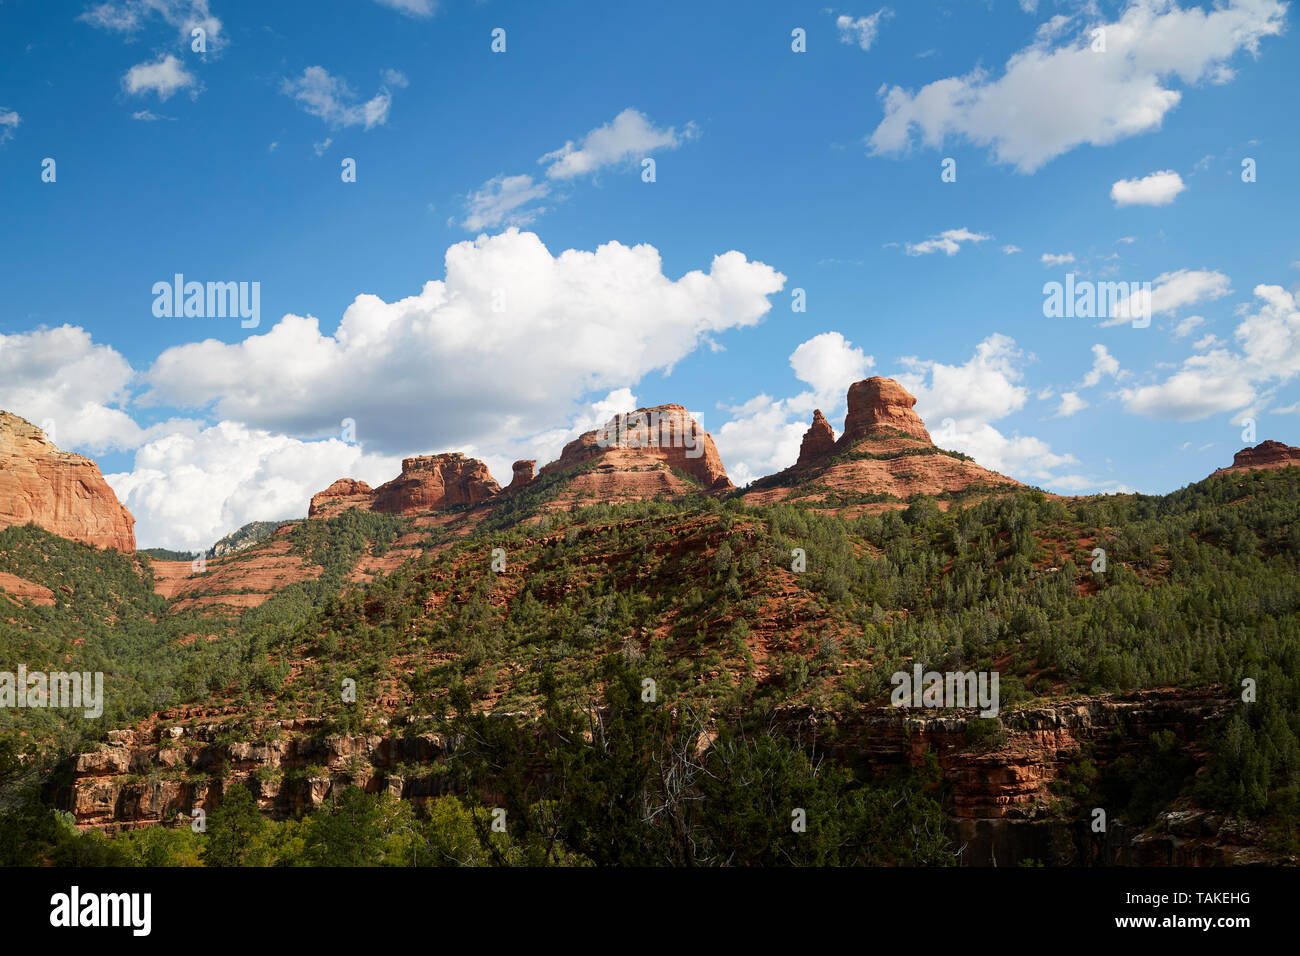 Red Rock canyons with rock formations against blue sky and fluffy white clouds. Stock Photo